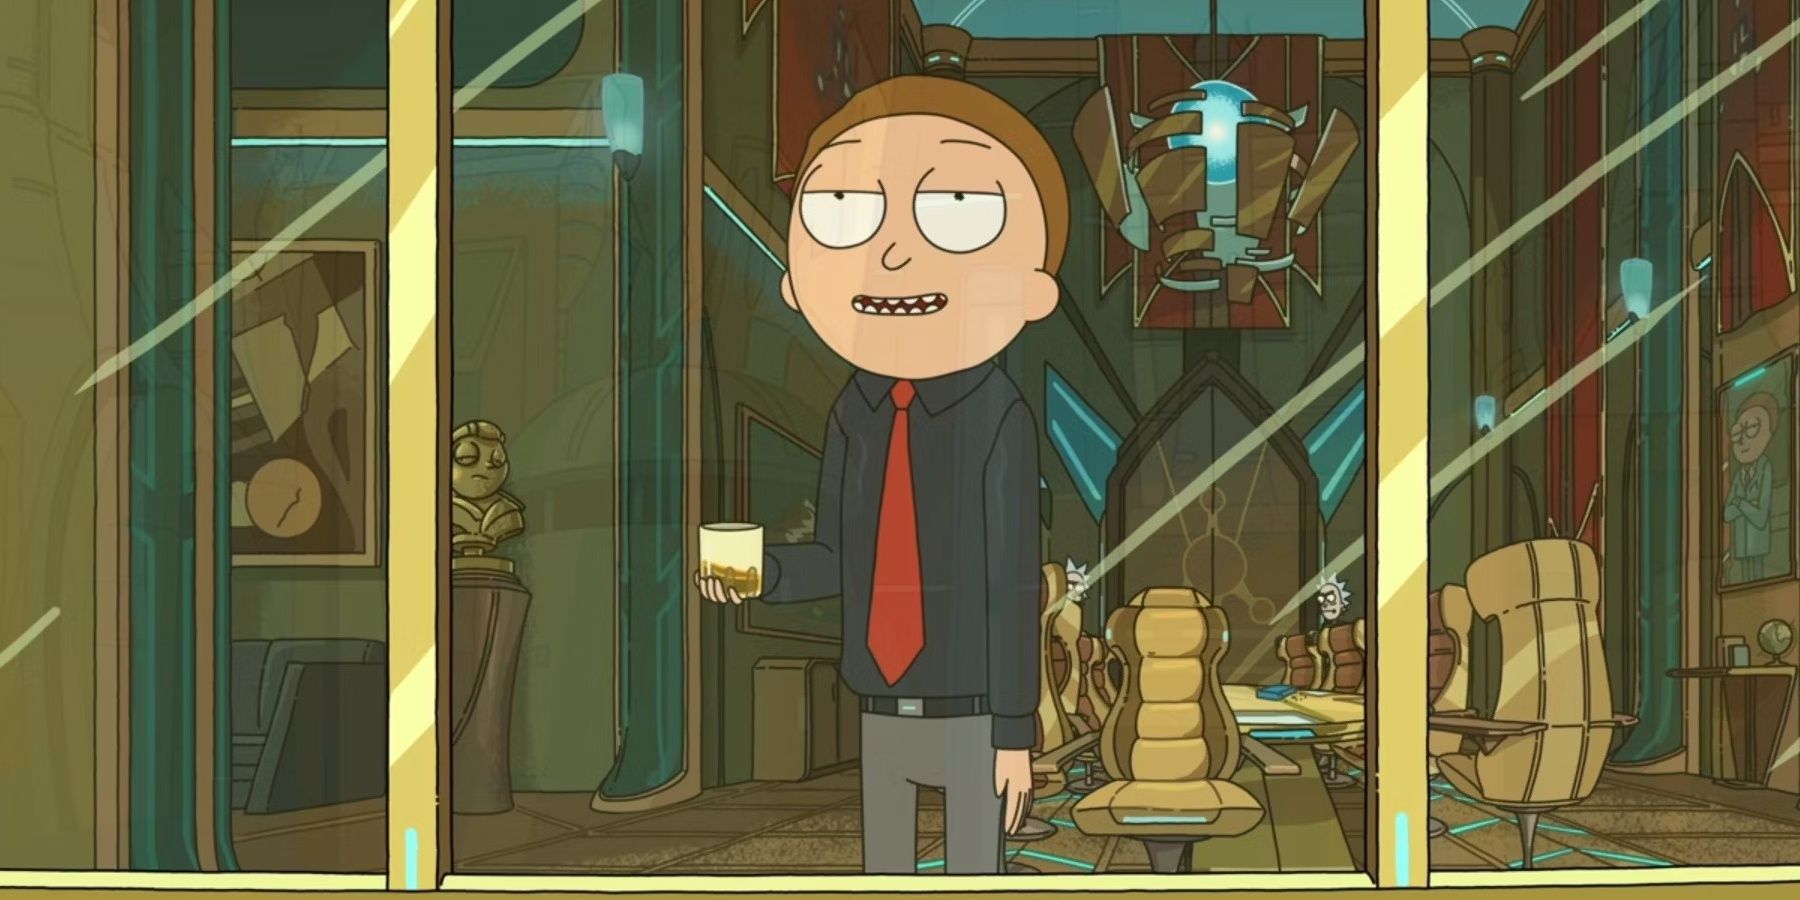 Evil Morty stands in his office with a glass of whiskey